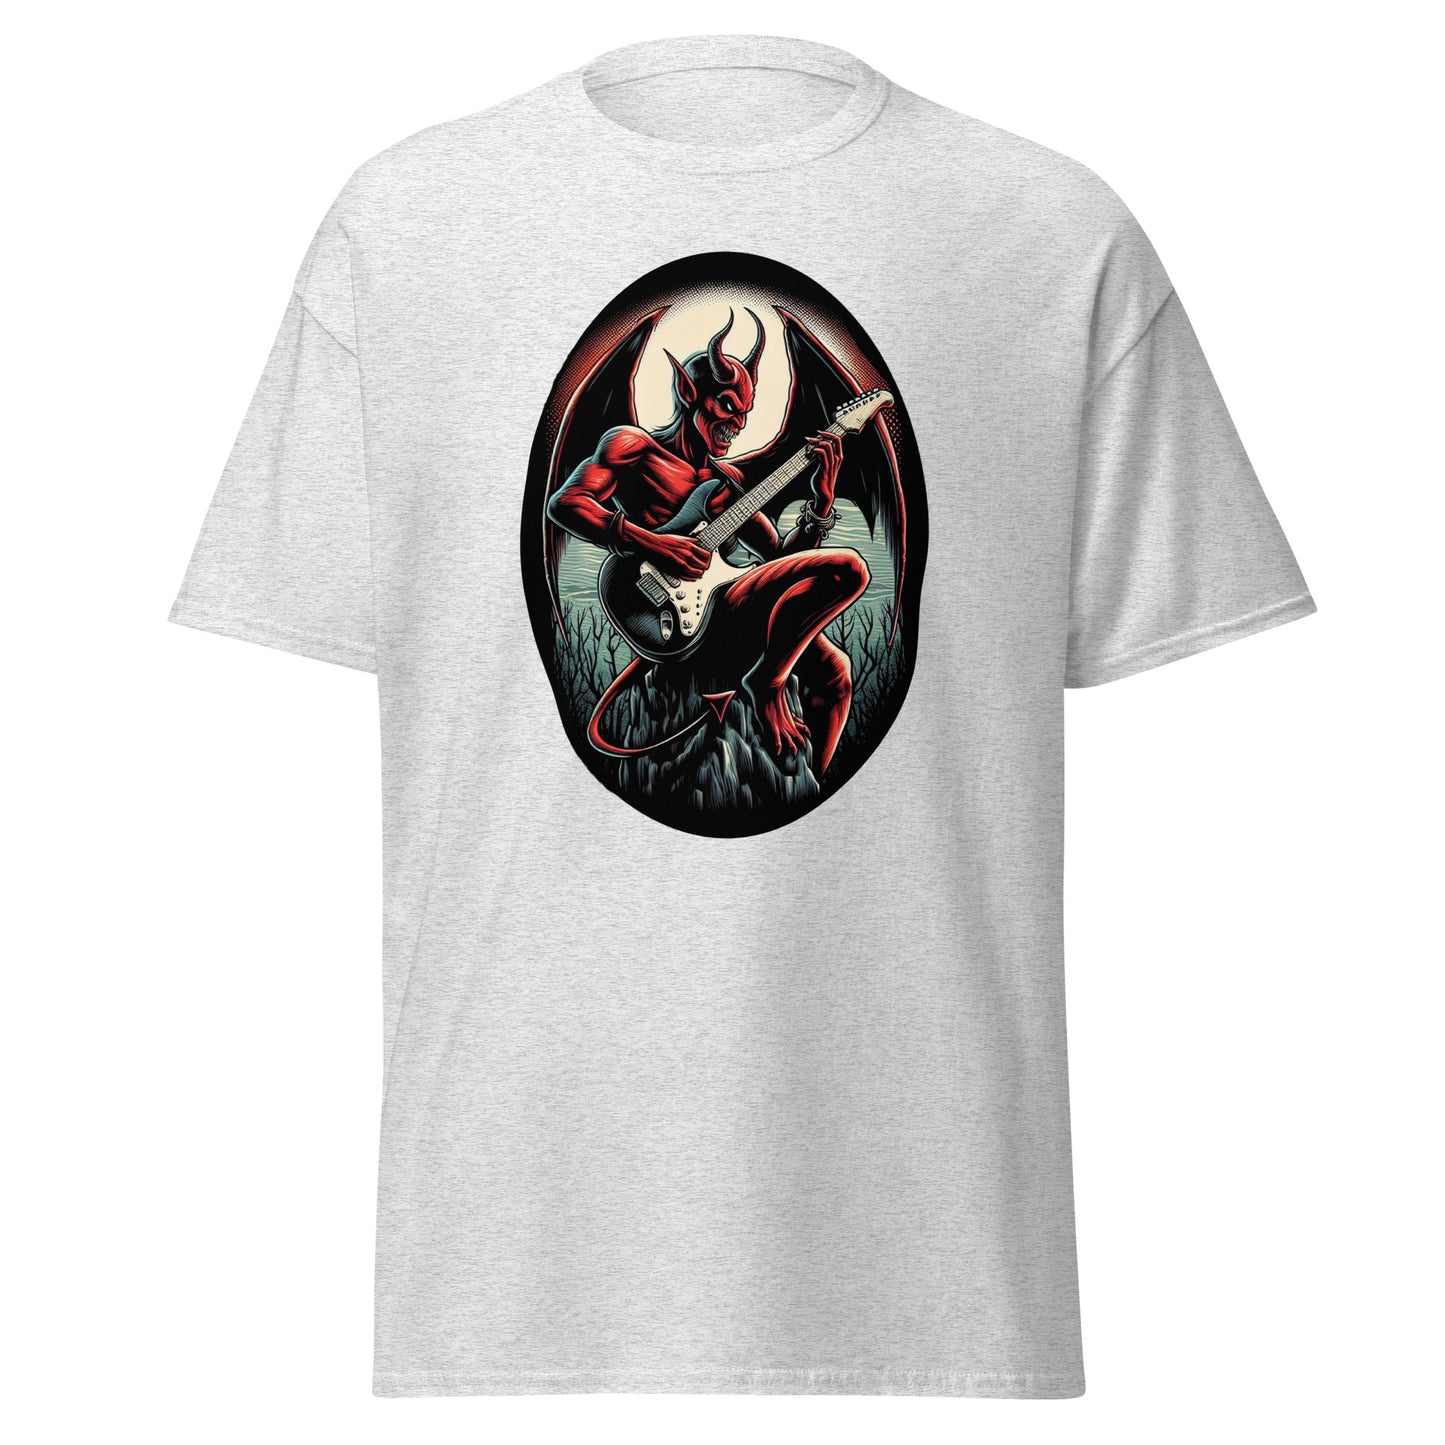 The Devil Playing Guitar T-Shirt - Unleash the Infernal Melodies